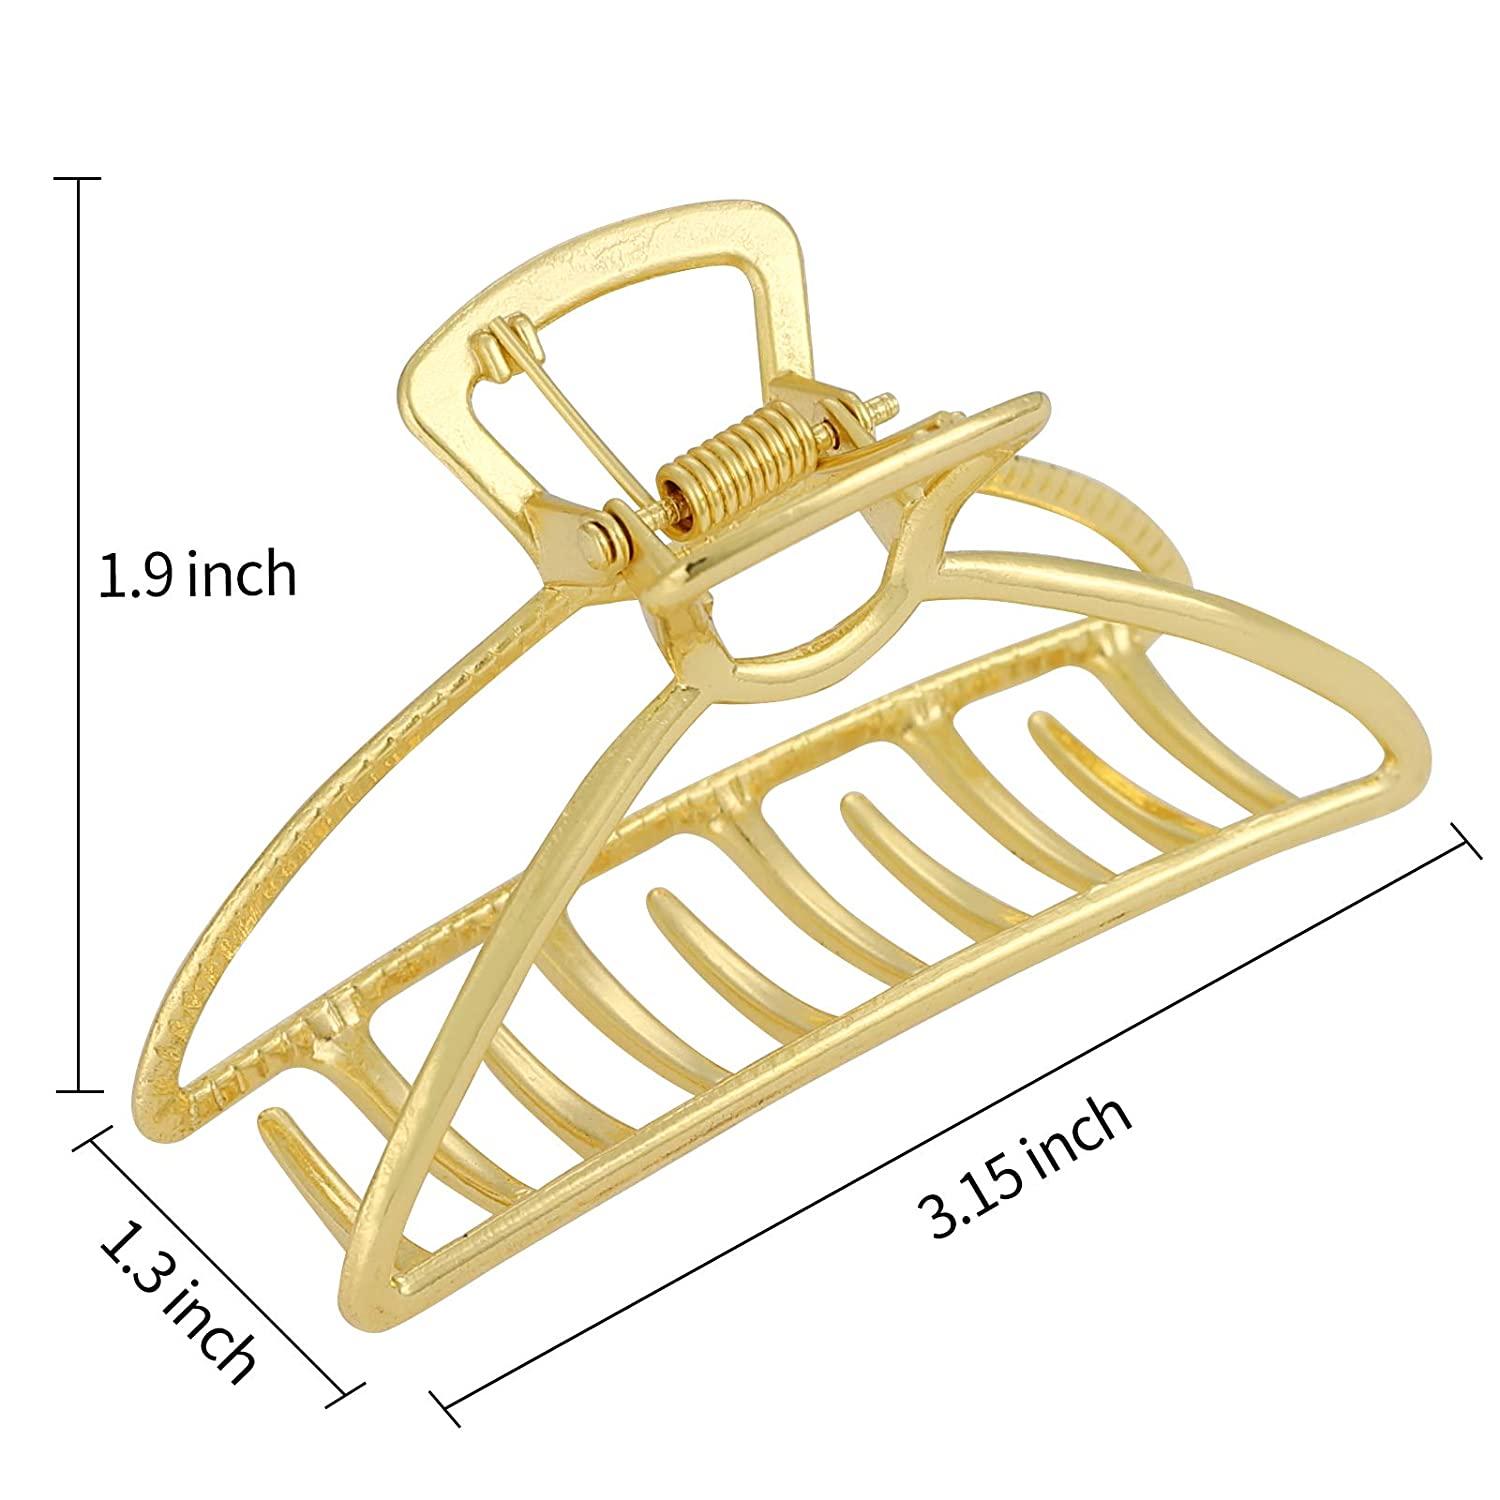  Kitsch Gold Metal Claw Clips - Large Claw Clips for